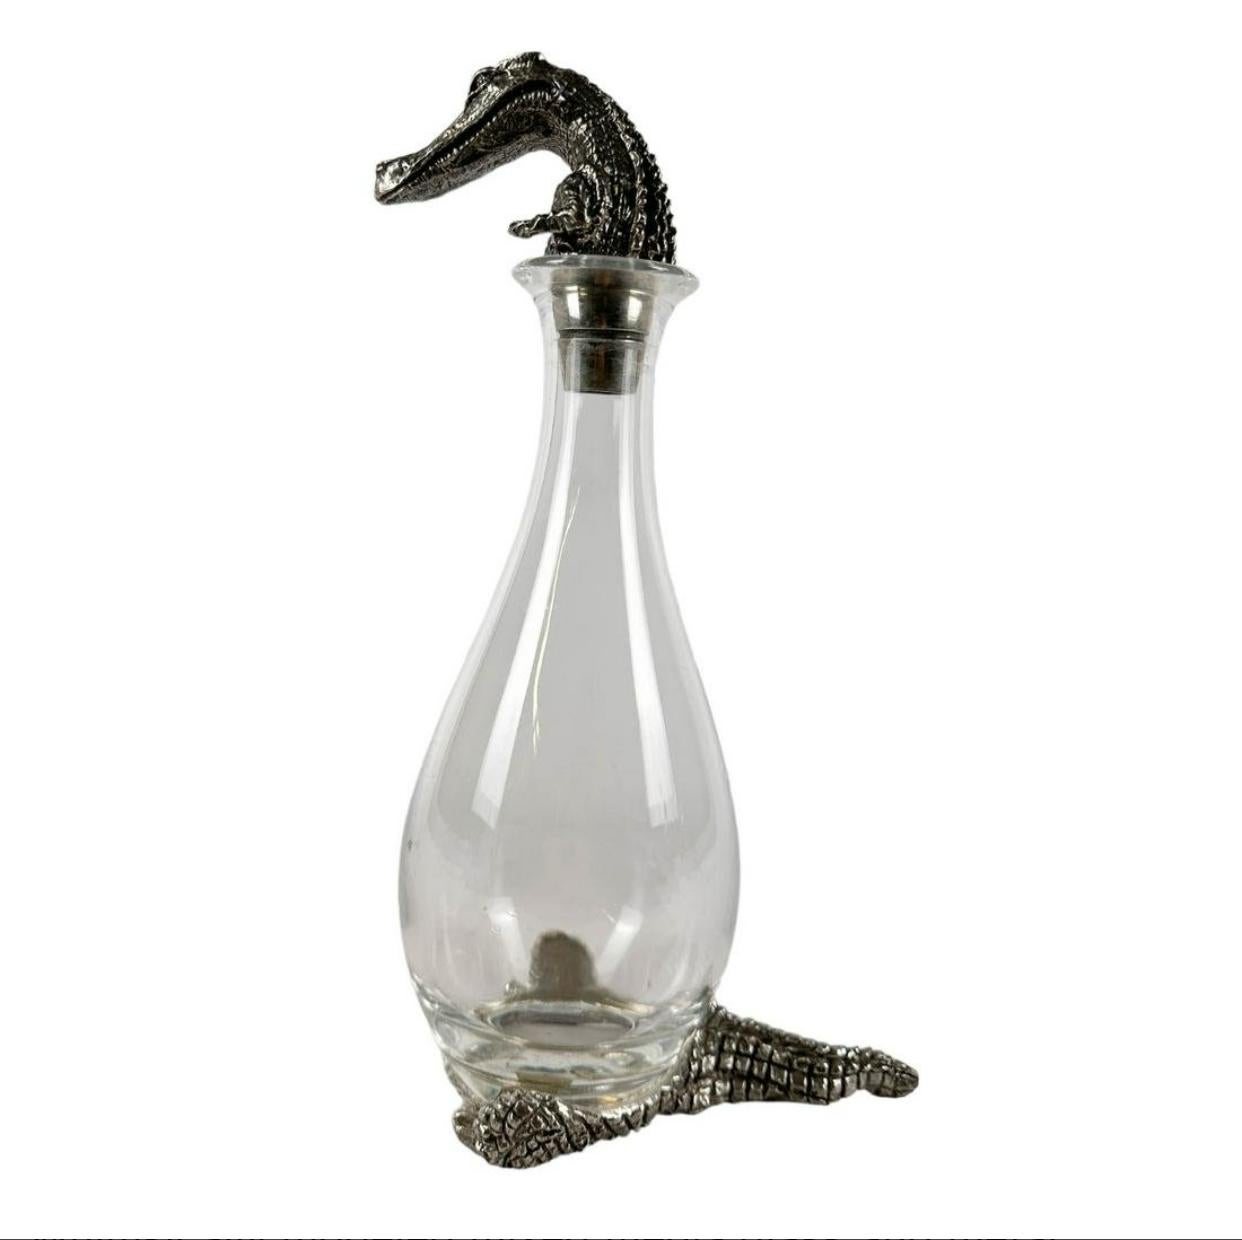 Whimsically modeled mixed media glass and metal bar barware themed article designed in the form of a crocodile alligator from the South African company Frankli Wild. The decanter is mouth blown crystal from France, the pewter head, feet and tail